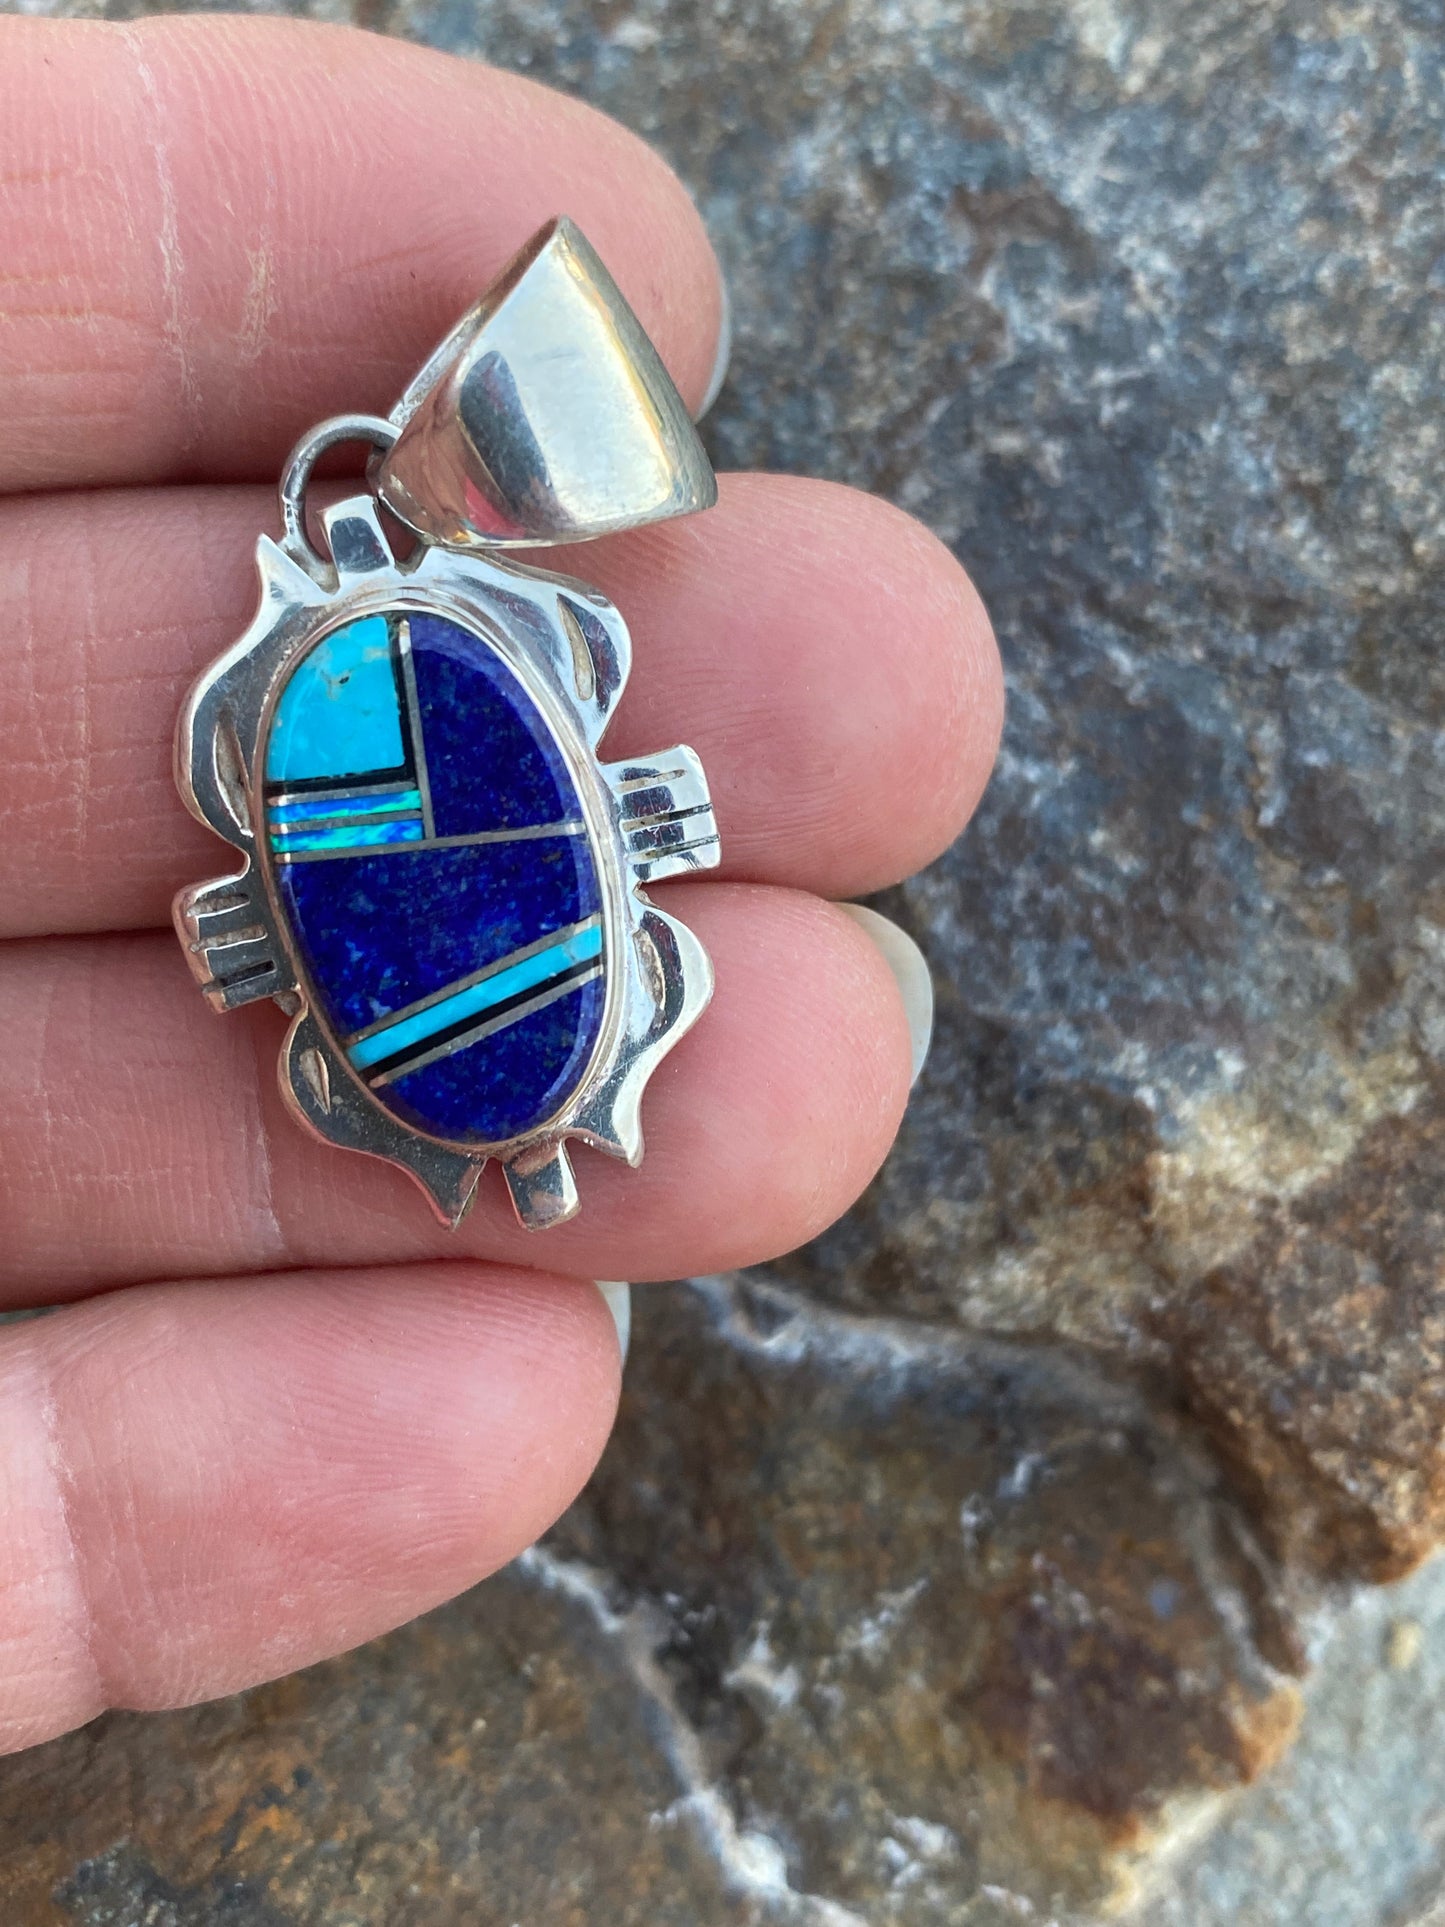 Navajo Lapis, Turquoise, Blue Jagged Opal Oval Pendant